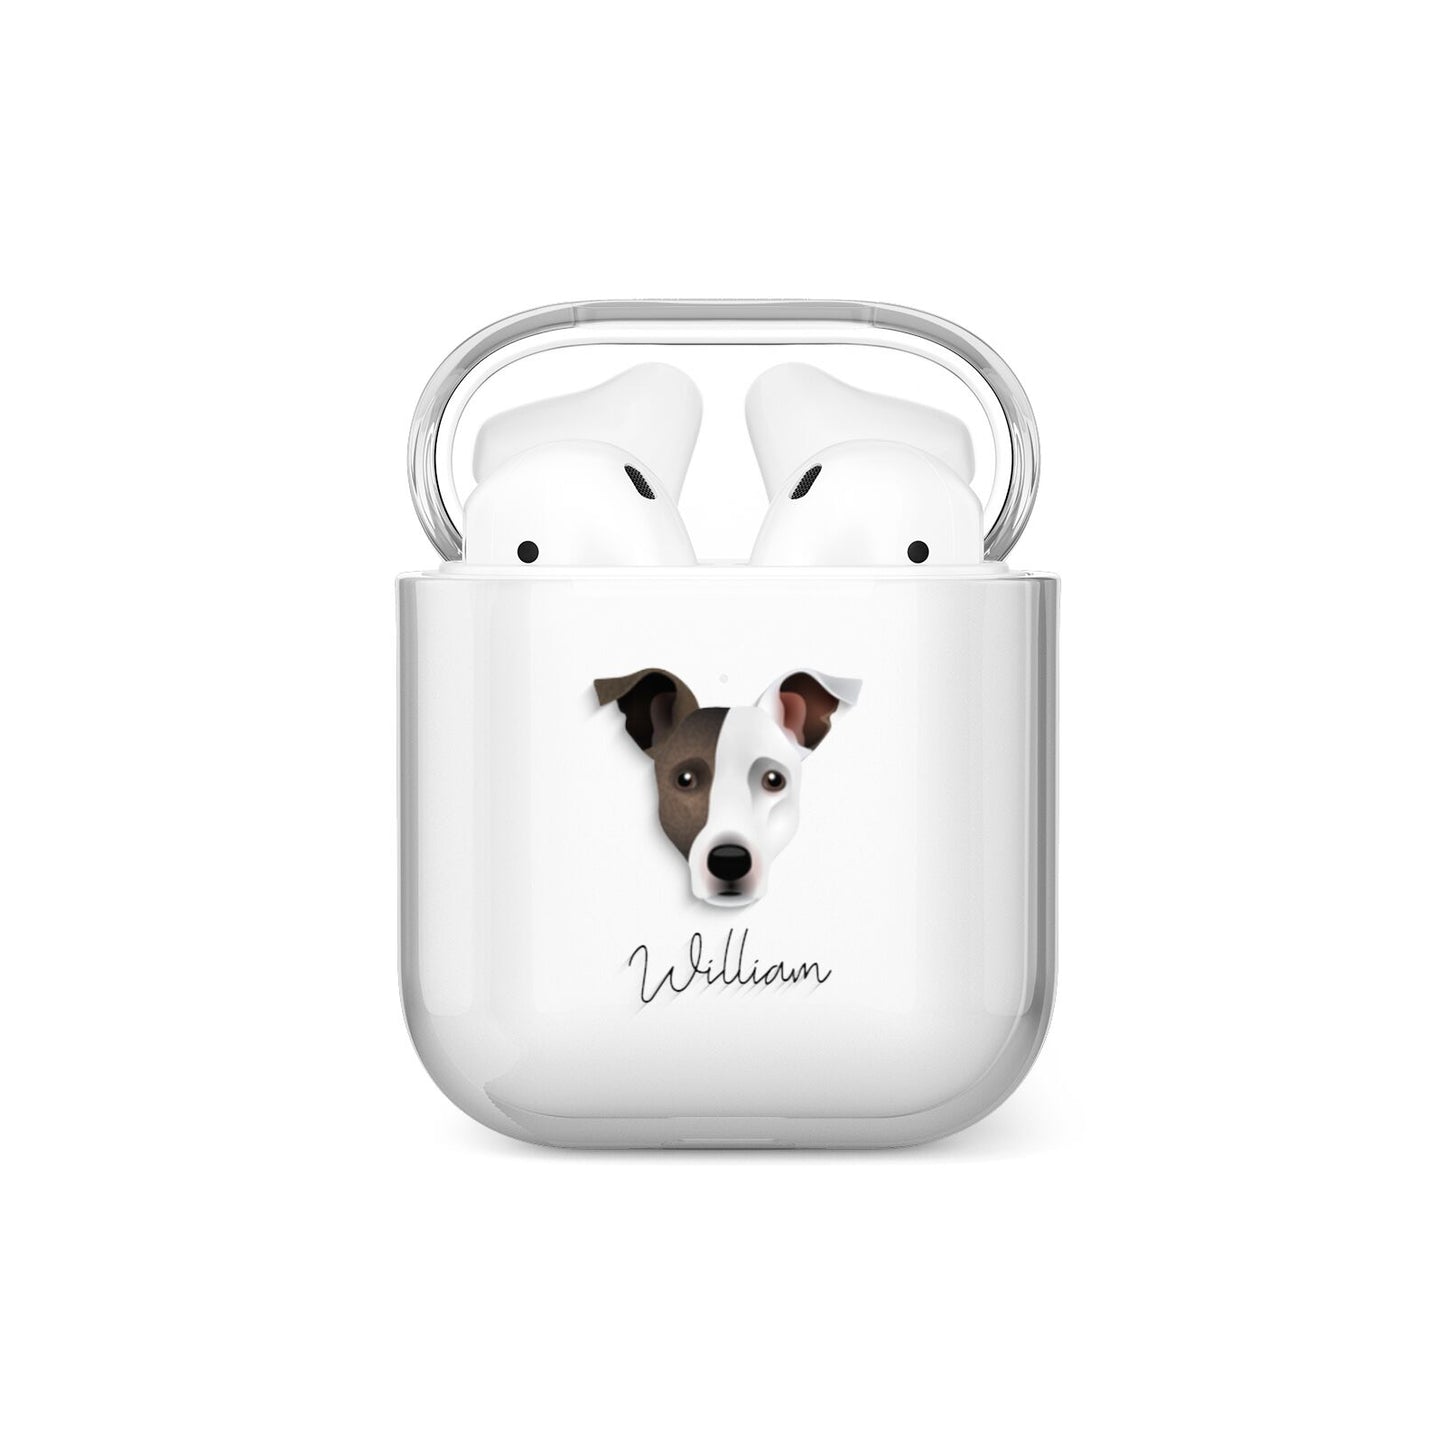 Staffy Jack Personalised AirPods Case